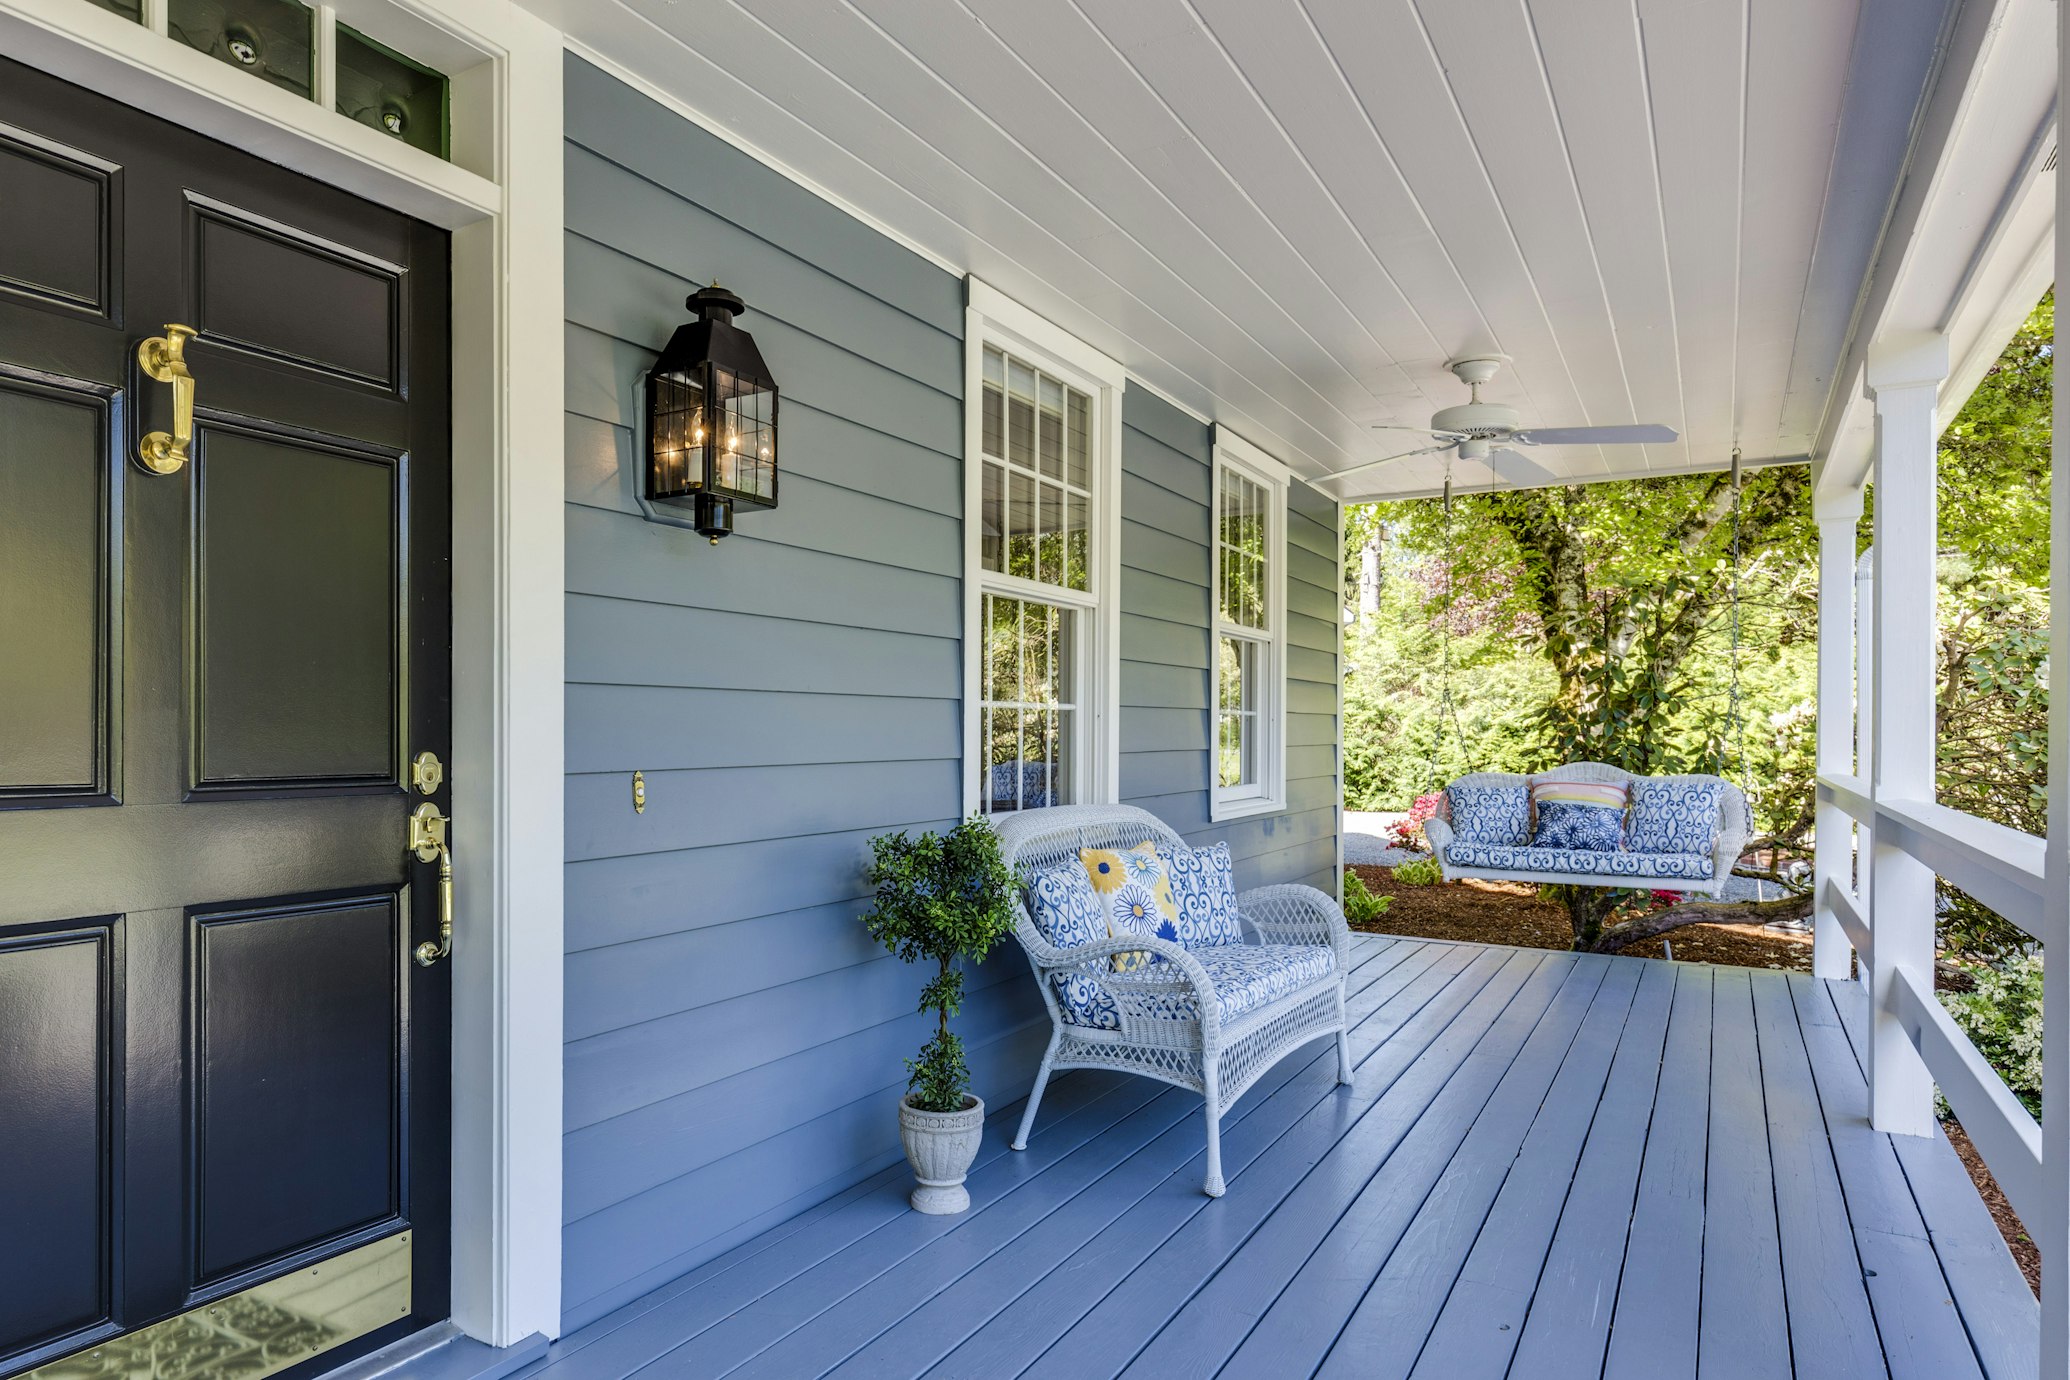 A house with a renovated blue porch.